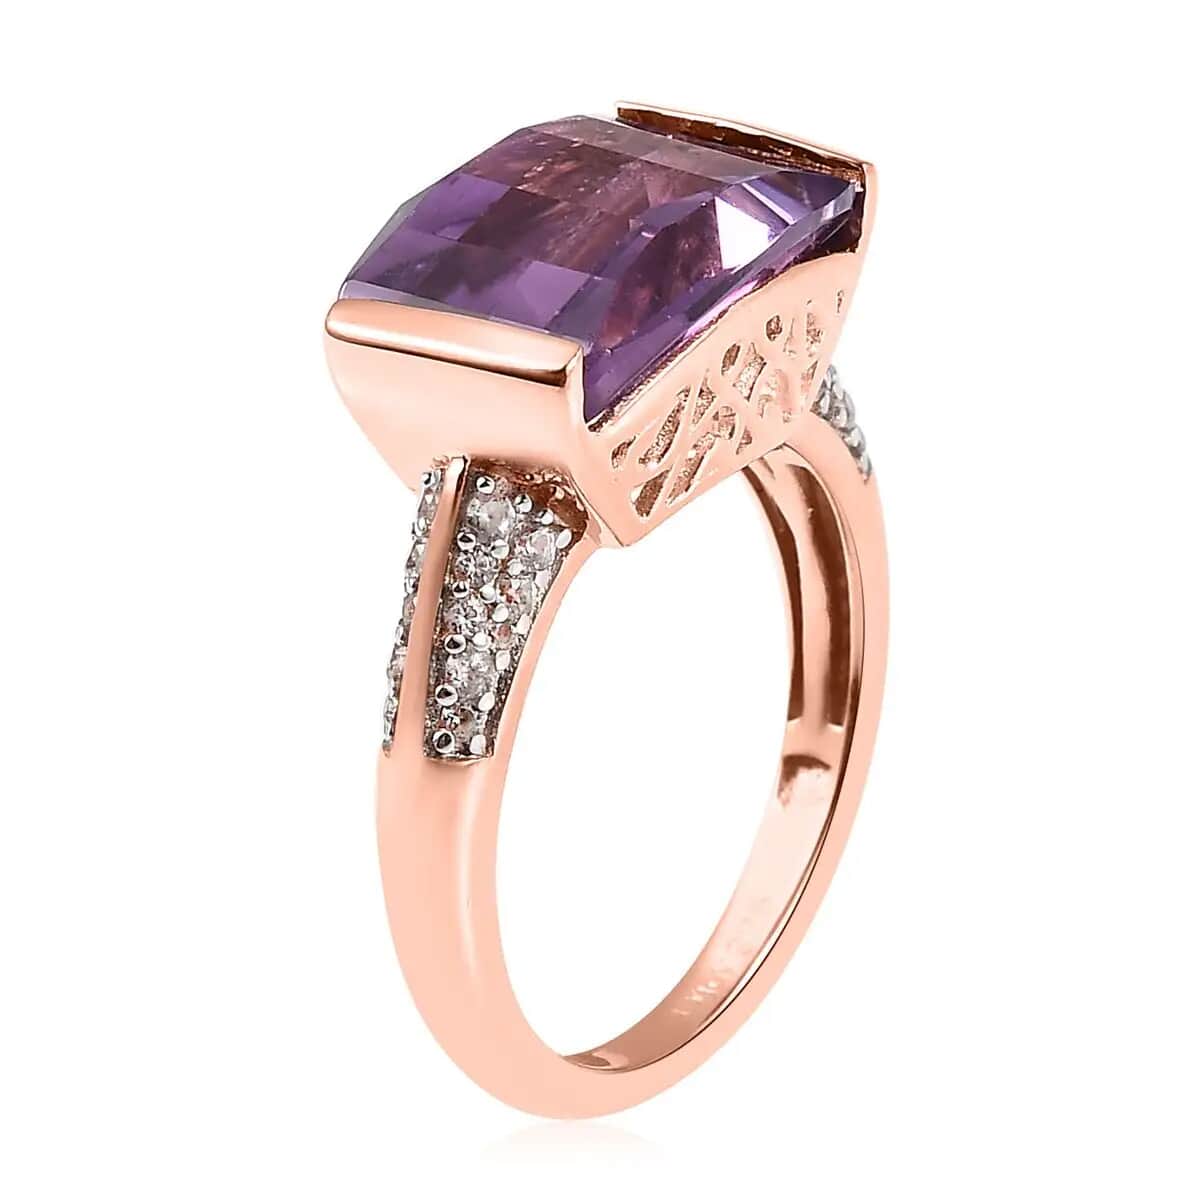 Premium Amethyst Ring, Vermeil Rose Gold Over Sterling Silver Ring, February Birthstone Ring, Purple Stone Ring, Silver Ring For Women 7.15 ctw image number 3